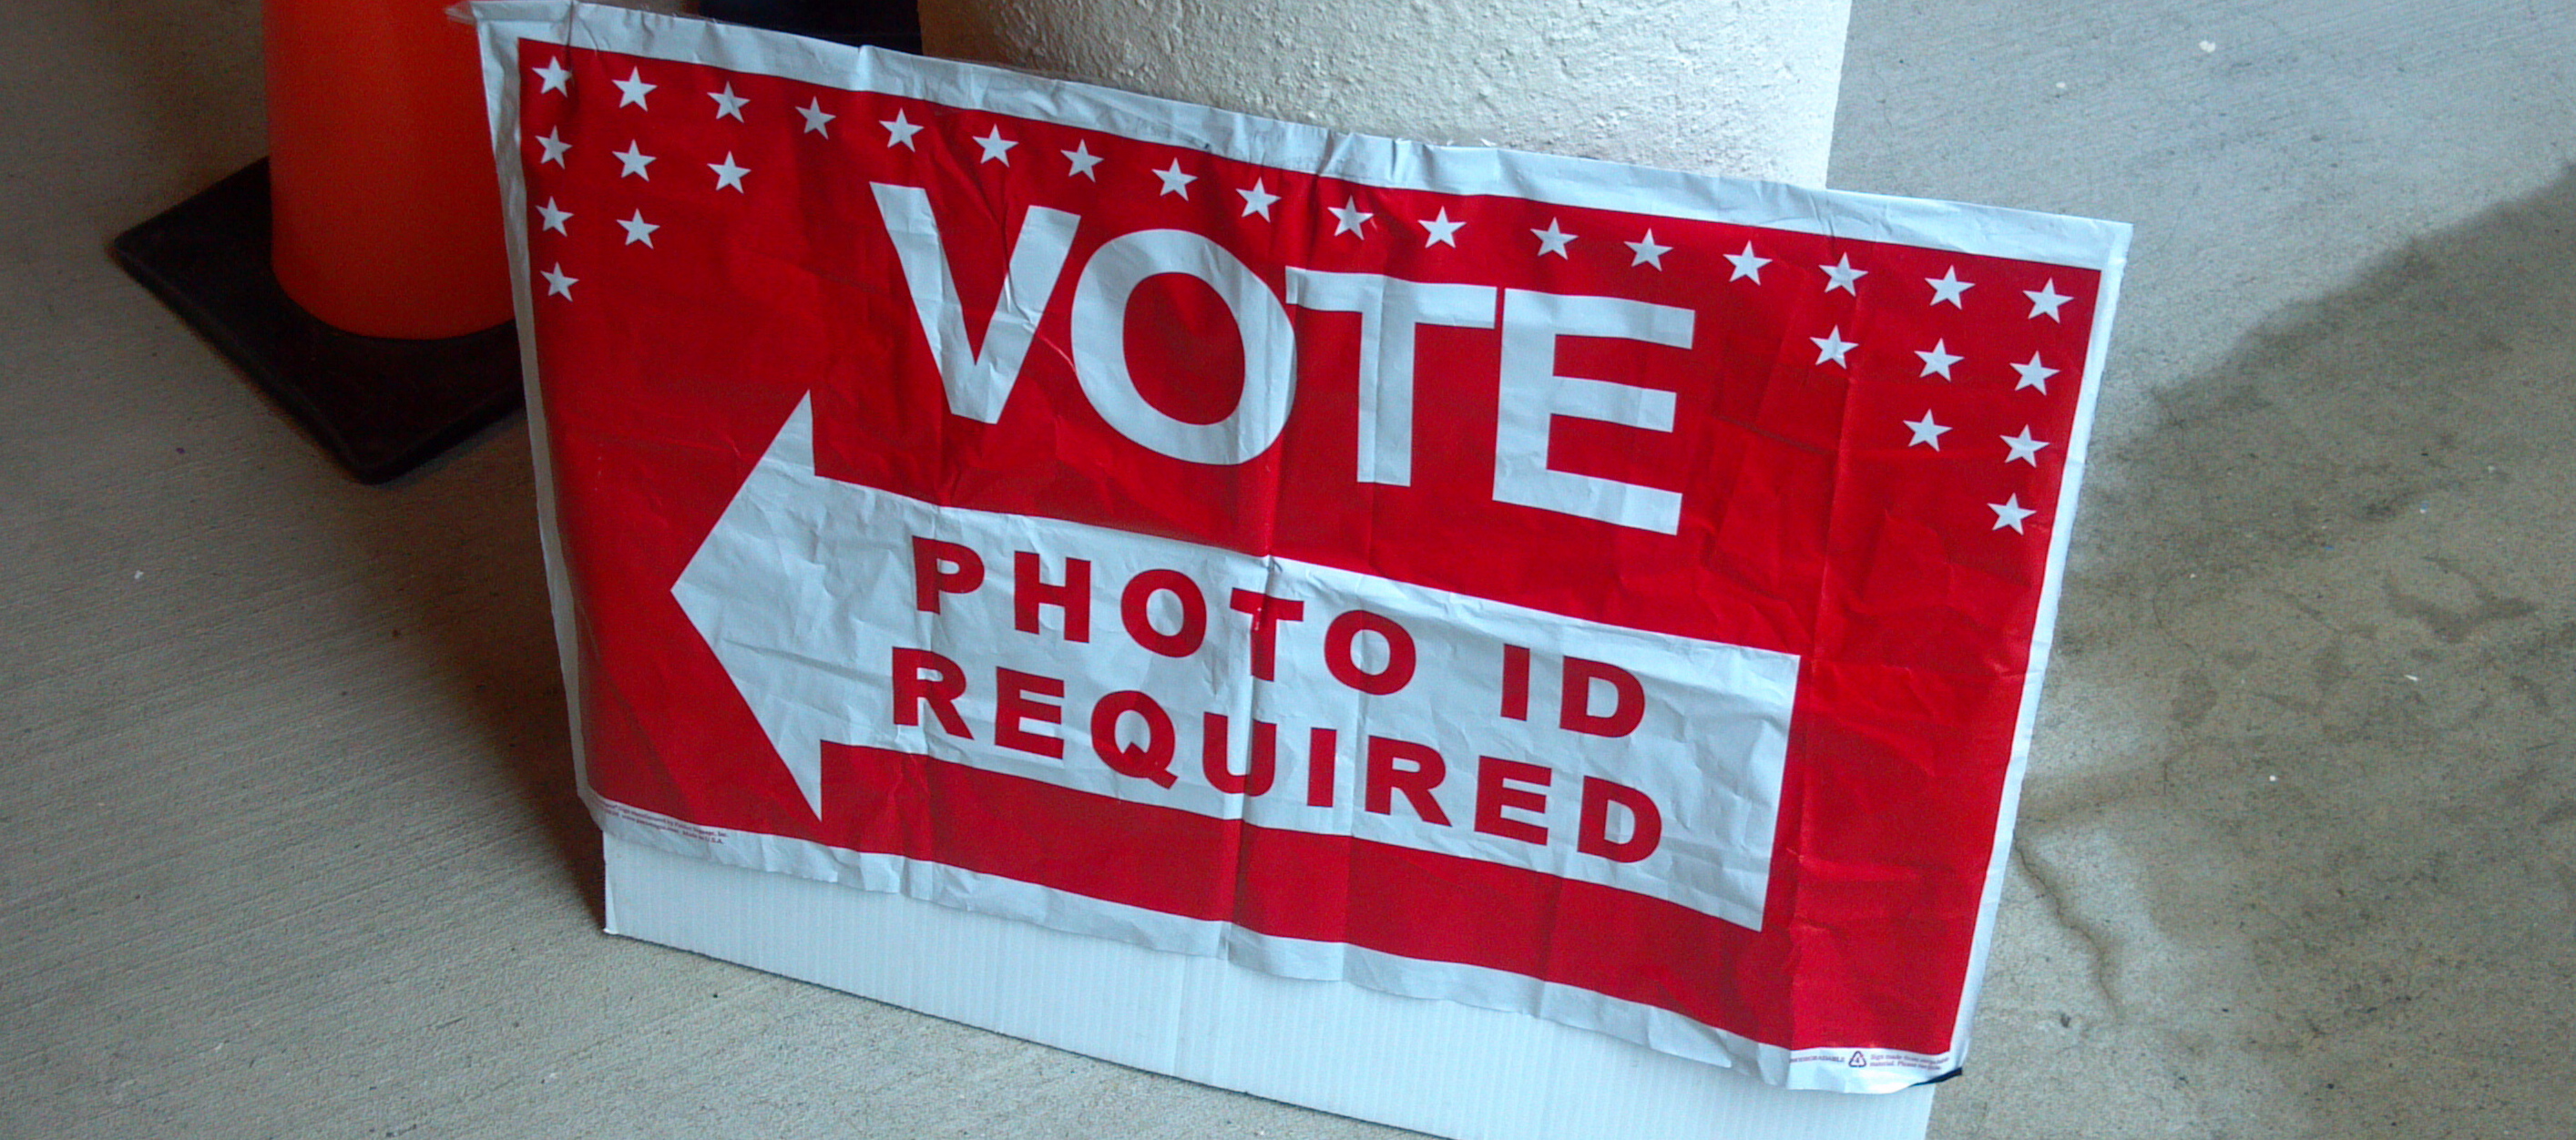 The Texas Voter ID Law and the 2016 Election University of Houston